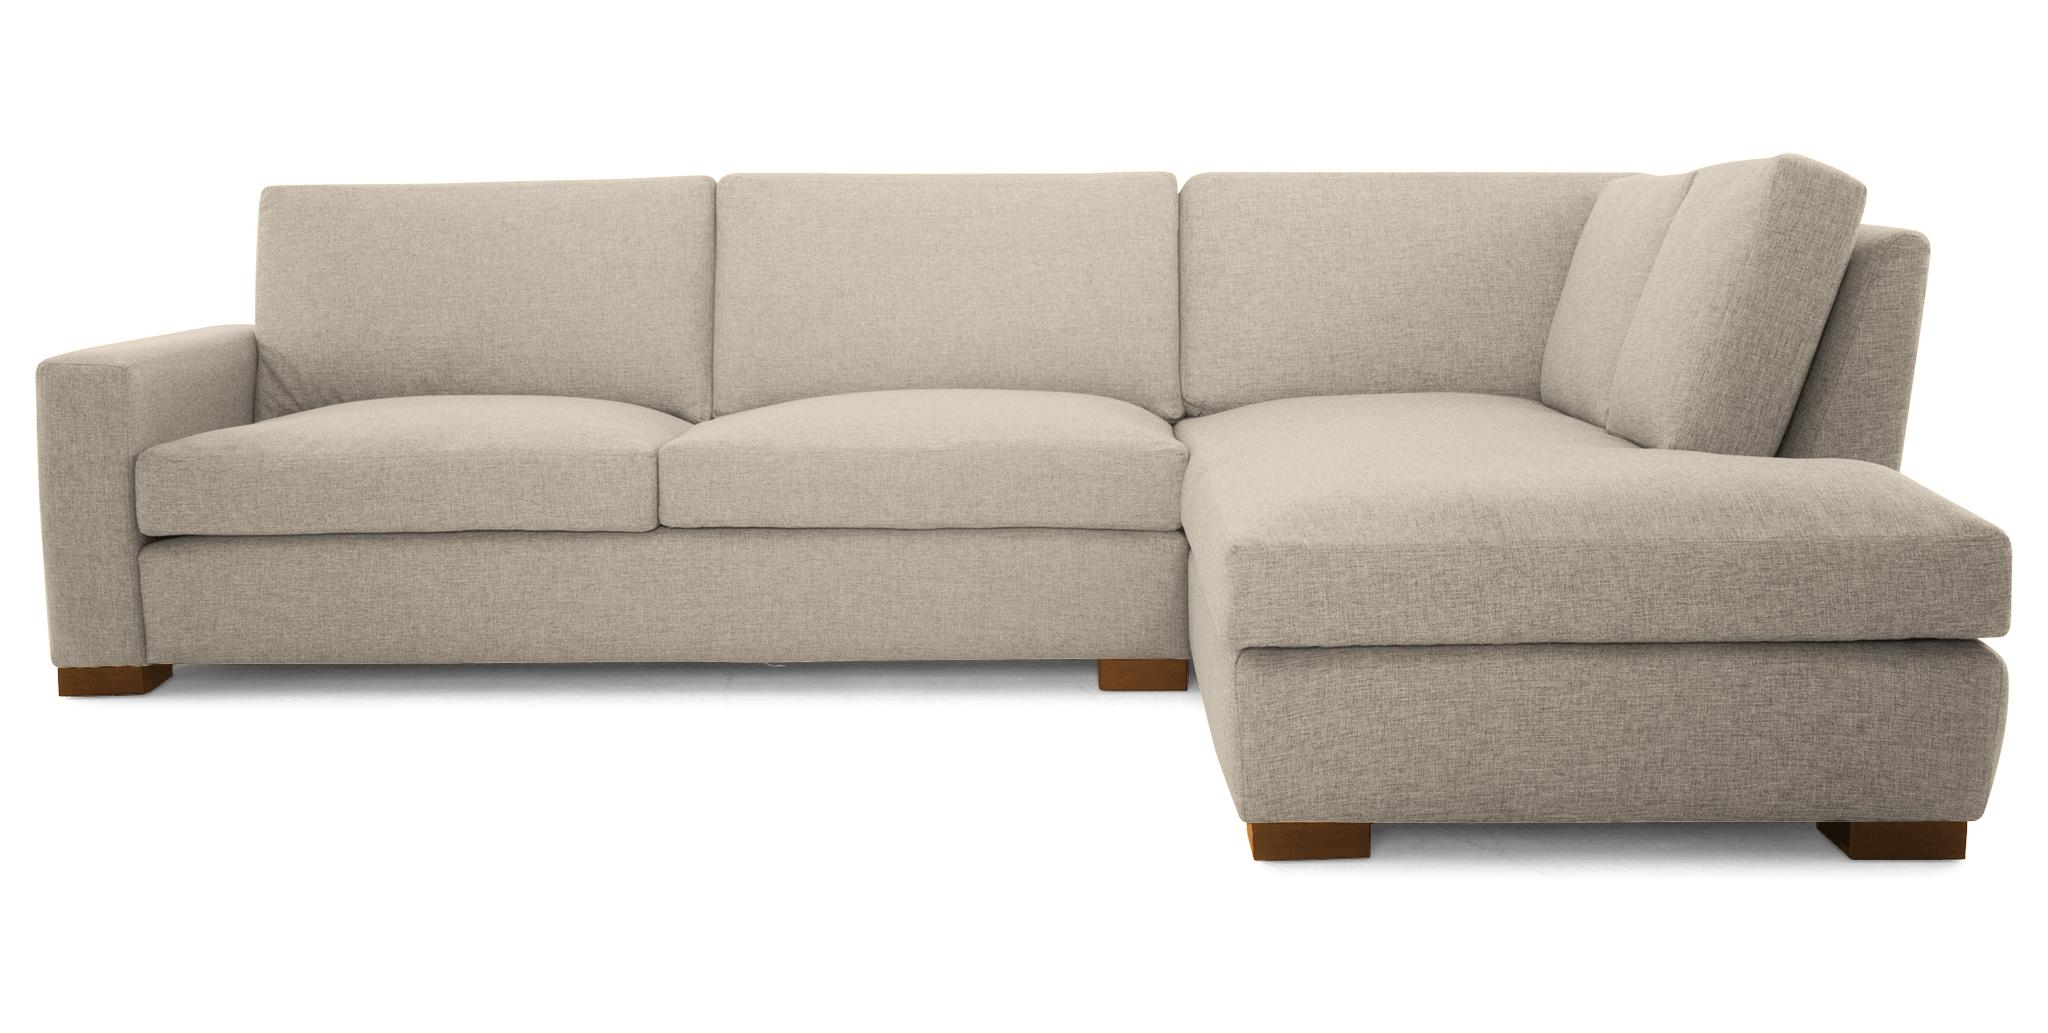 Beige/White Anton Mid Century Modern Sectional with Bumper - Cody Sandstone - Mocha - Right  - Image 0